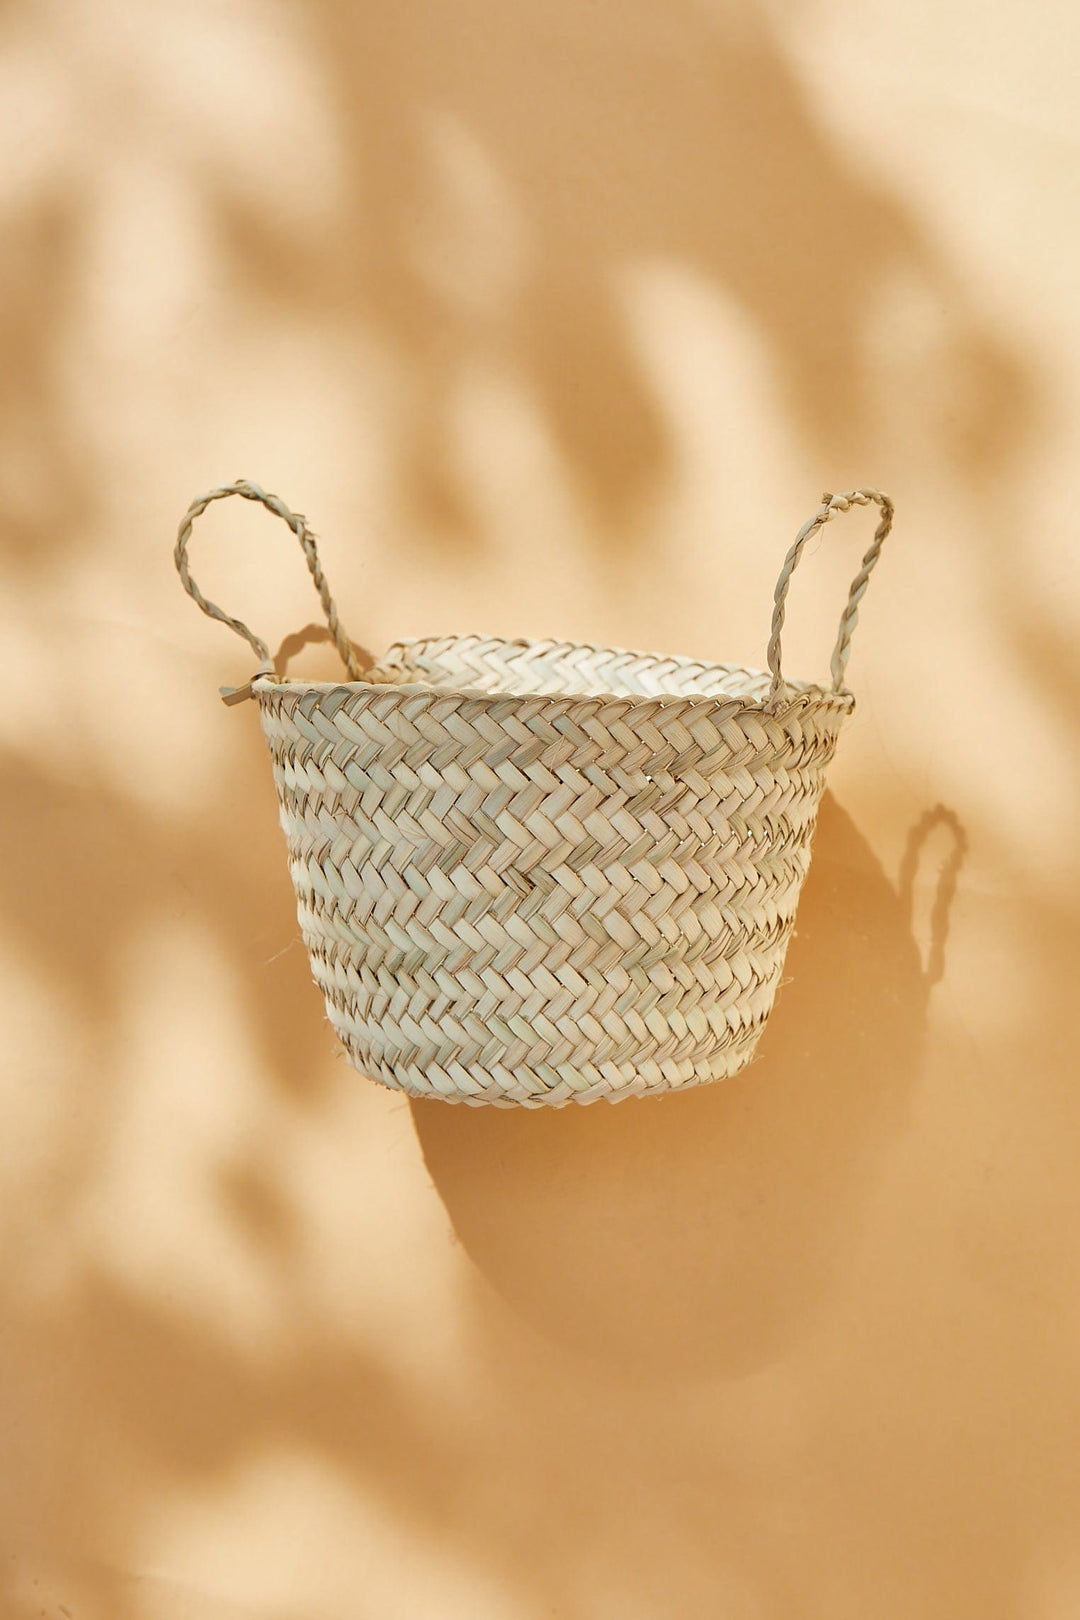 Idlewild Floral Co. Small Woven Basket